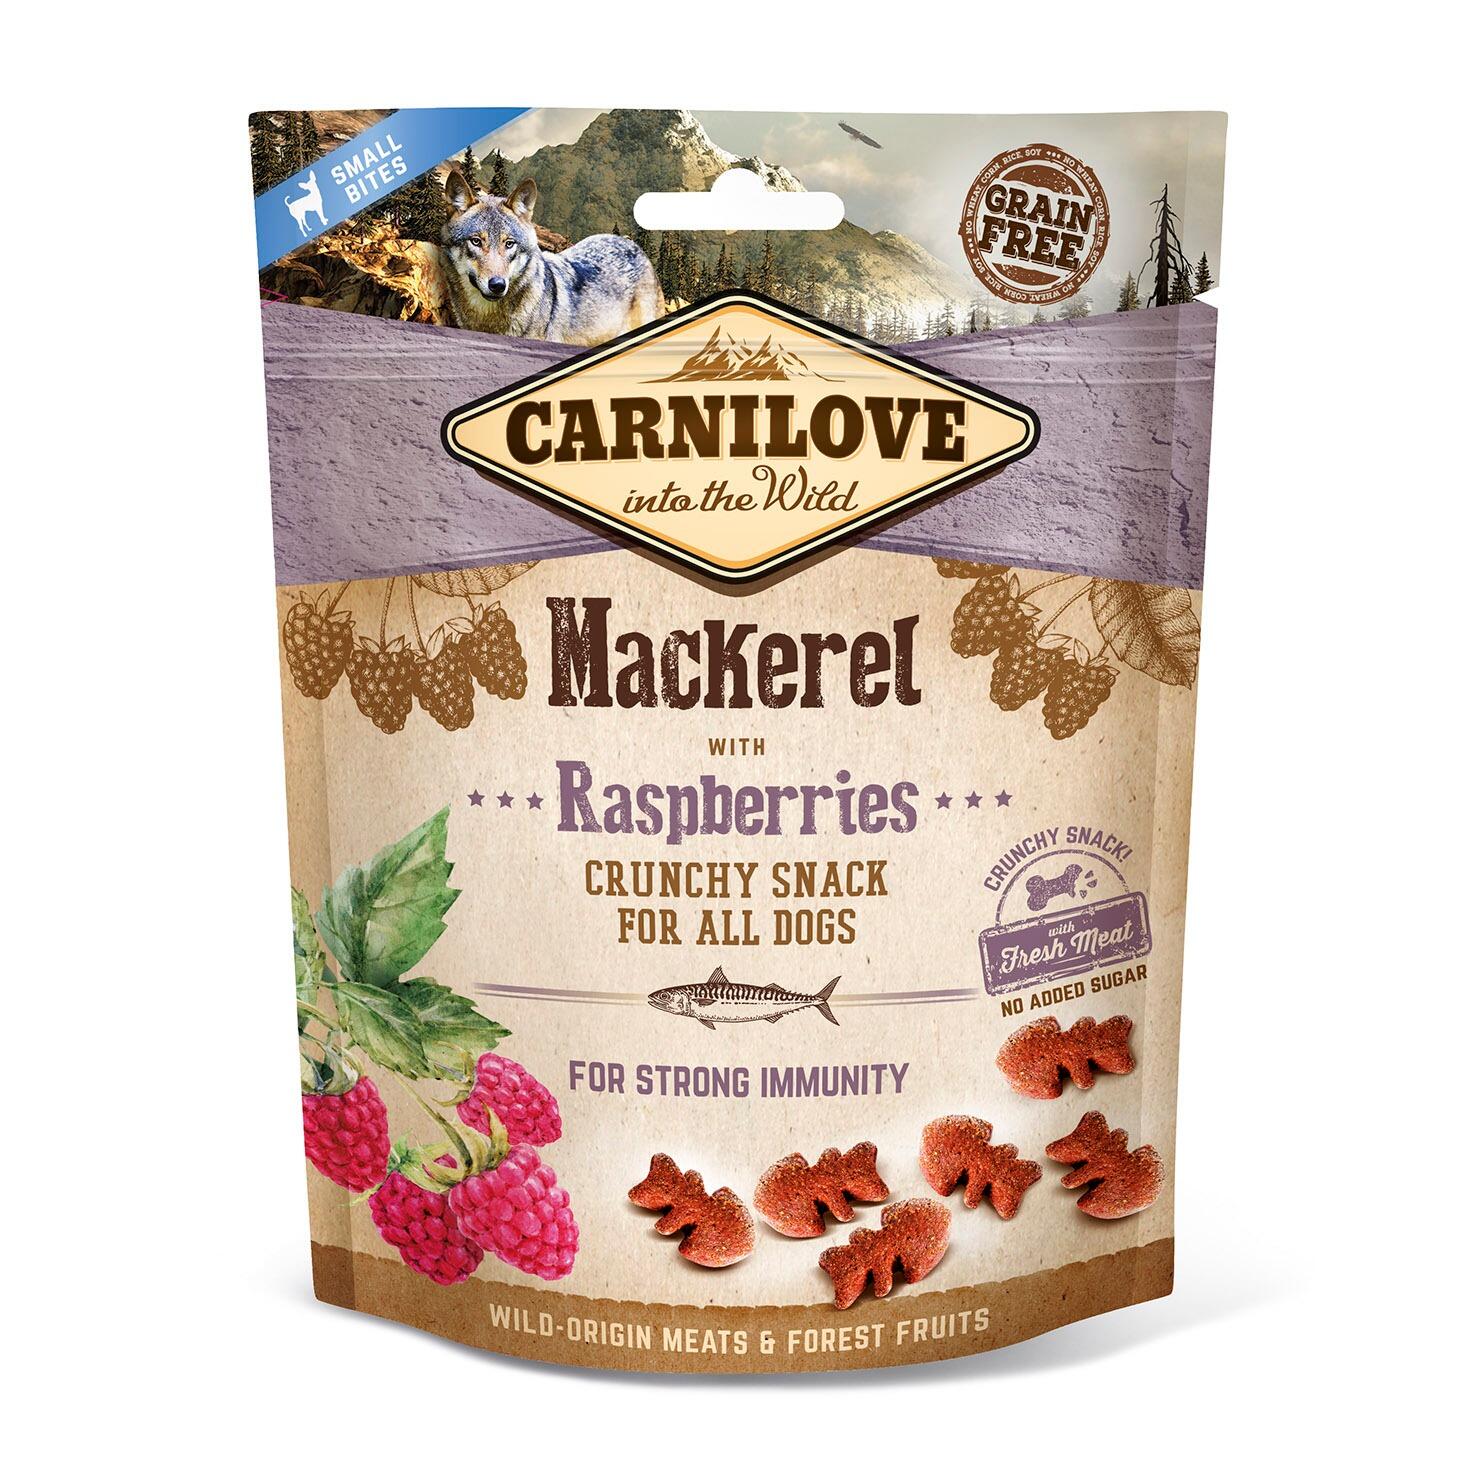 Carnilove Mackerel with Raspberries Crunchy Snack for Dogs